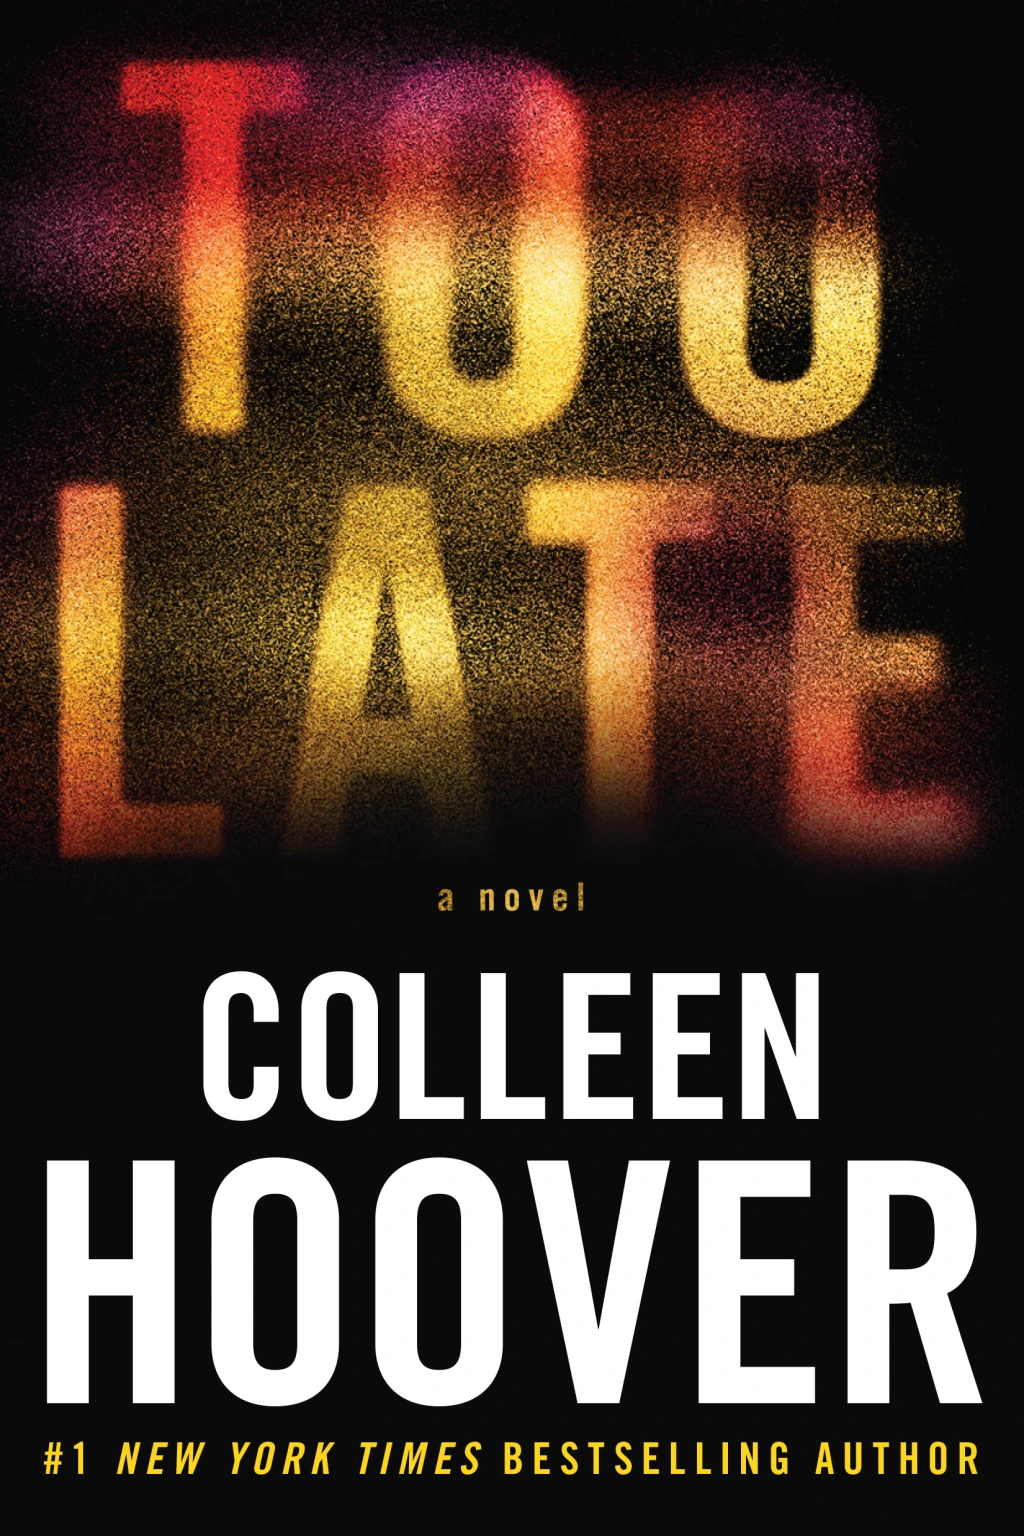 Never Never, Colleen Hoover (English, Paperback): Buy Never Never, Colleen  Hoover (English, Paperback) by Colleen Hoover at Low Price in India